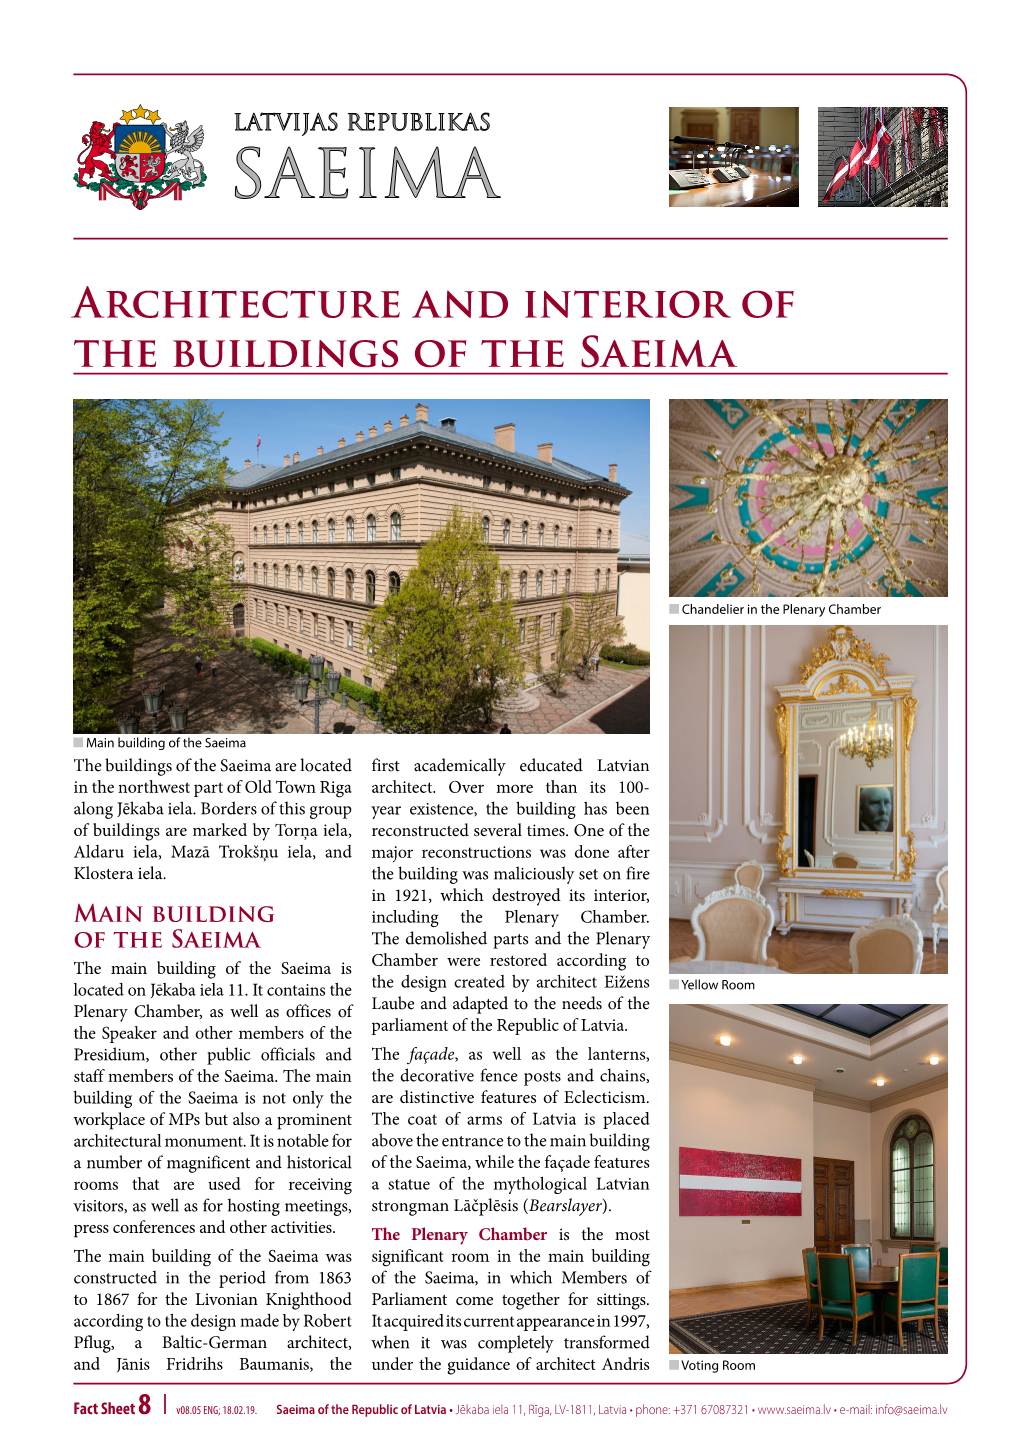 Architecture and Interior of the Buildings of the Saeima